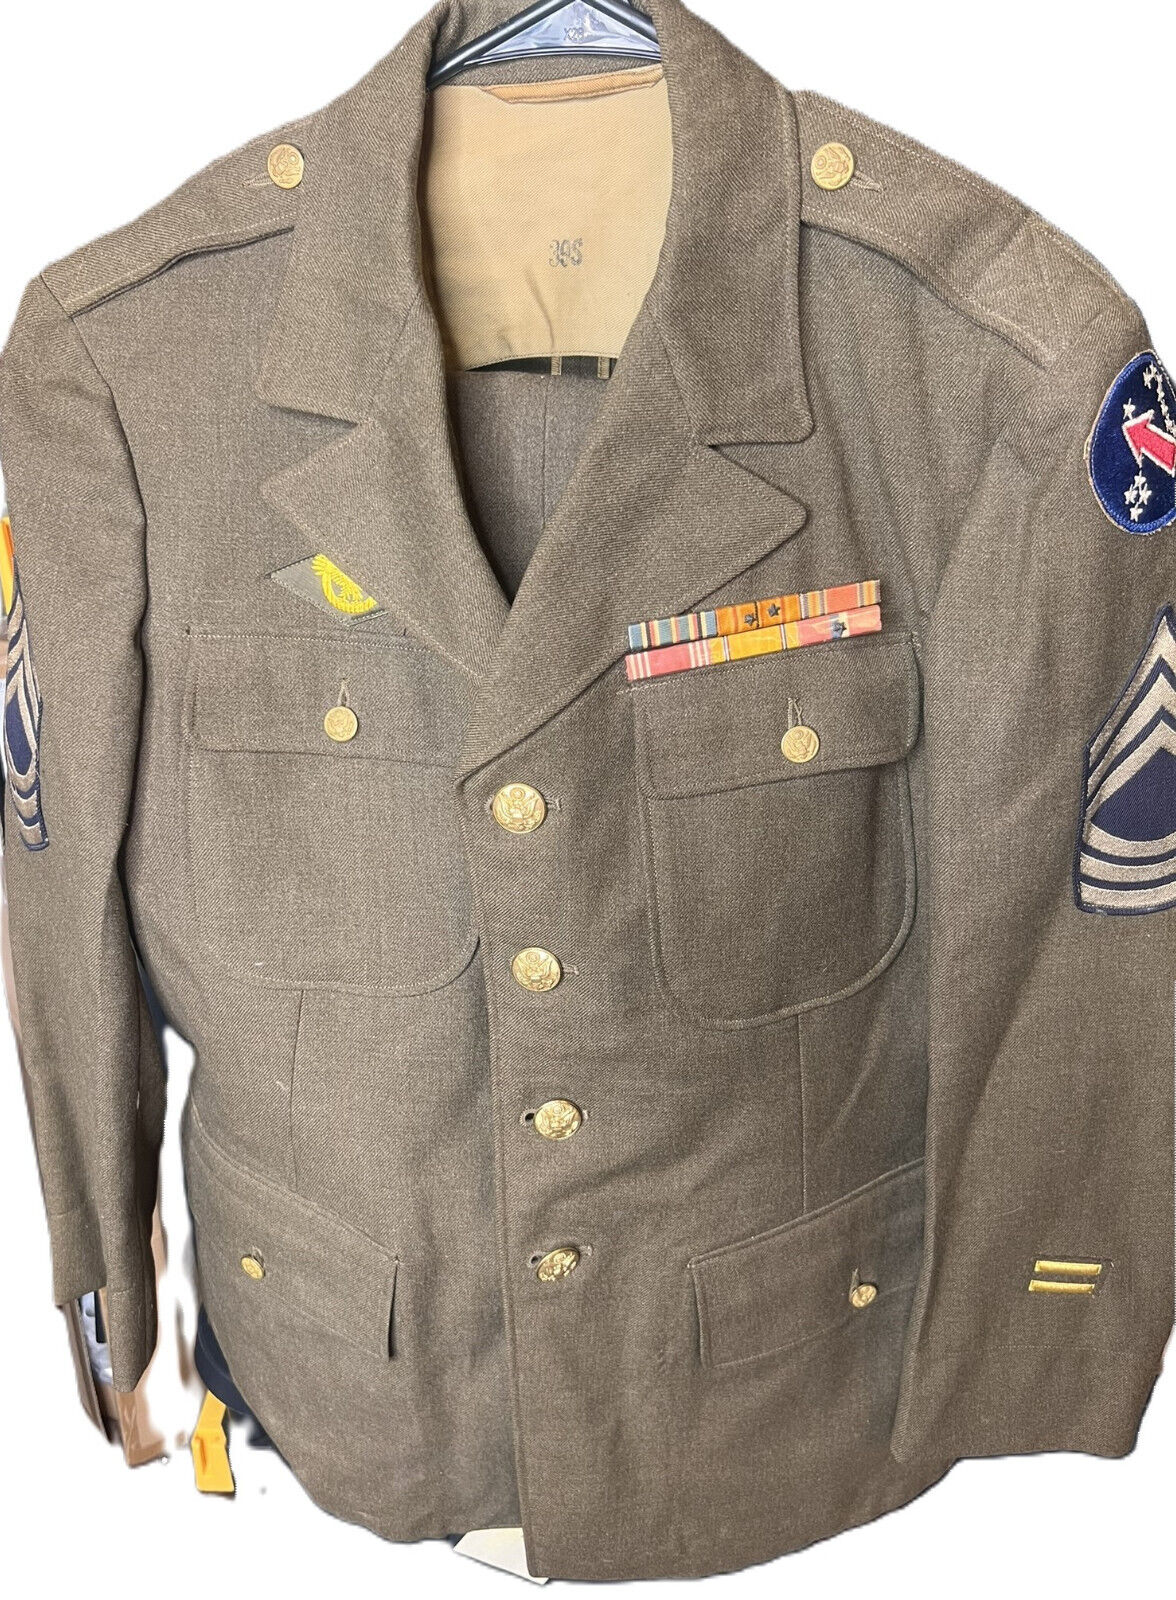 WW2 US 4 Pocket Jacket Tunic & Pants Army Forces Western Pacific - 39S/W34/L35